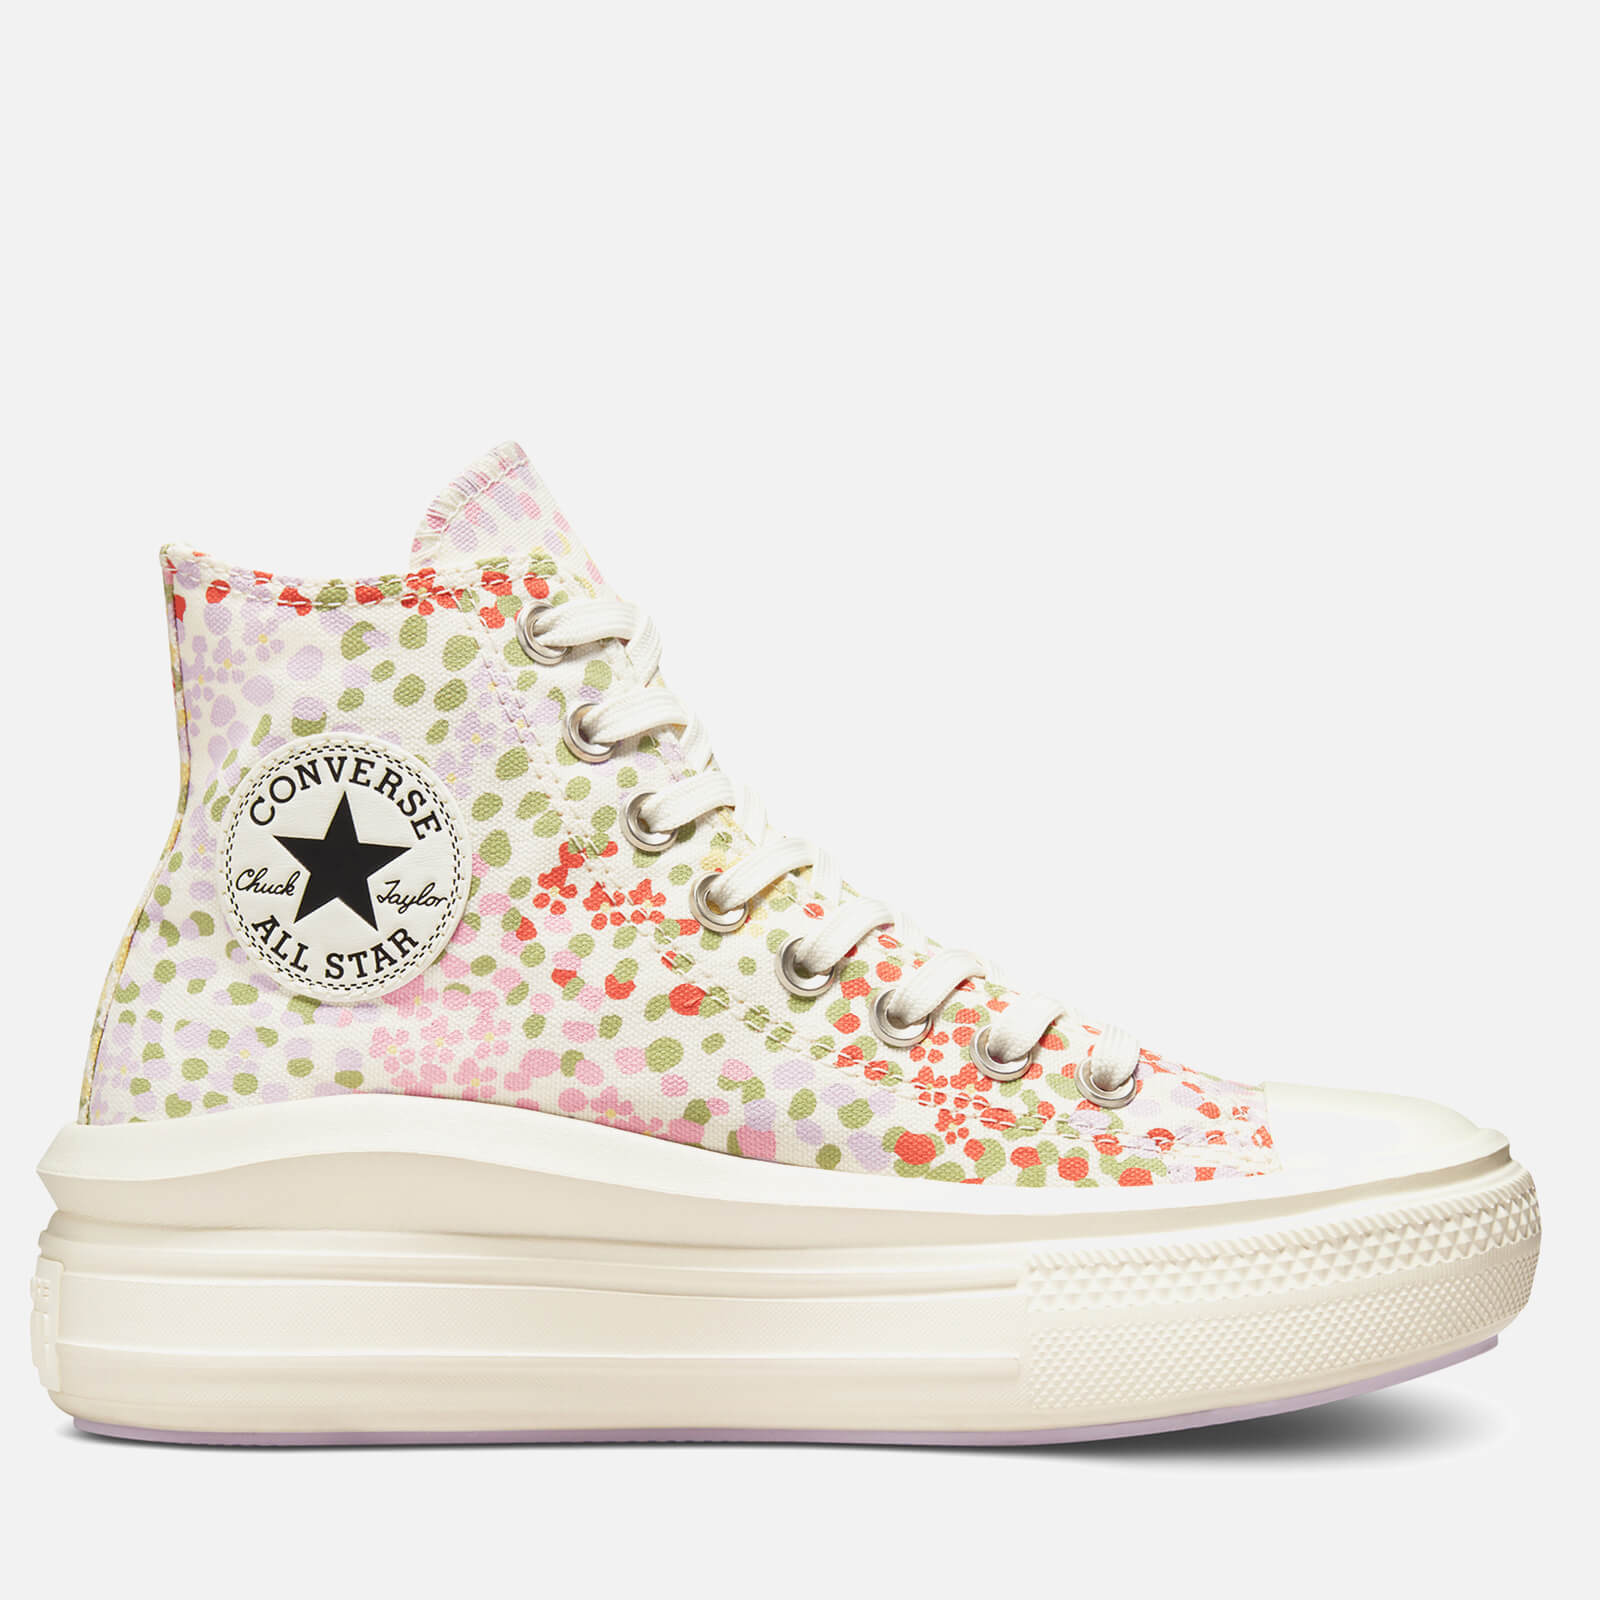 Converse Women's Chuck Taylor All Star Things To Grow Move Hi-Top Trainers - Egret/Multi/Black - UK 3